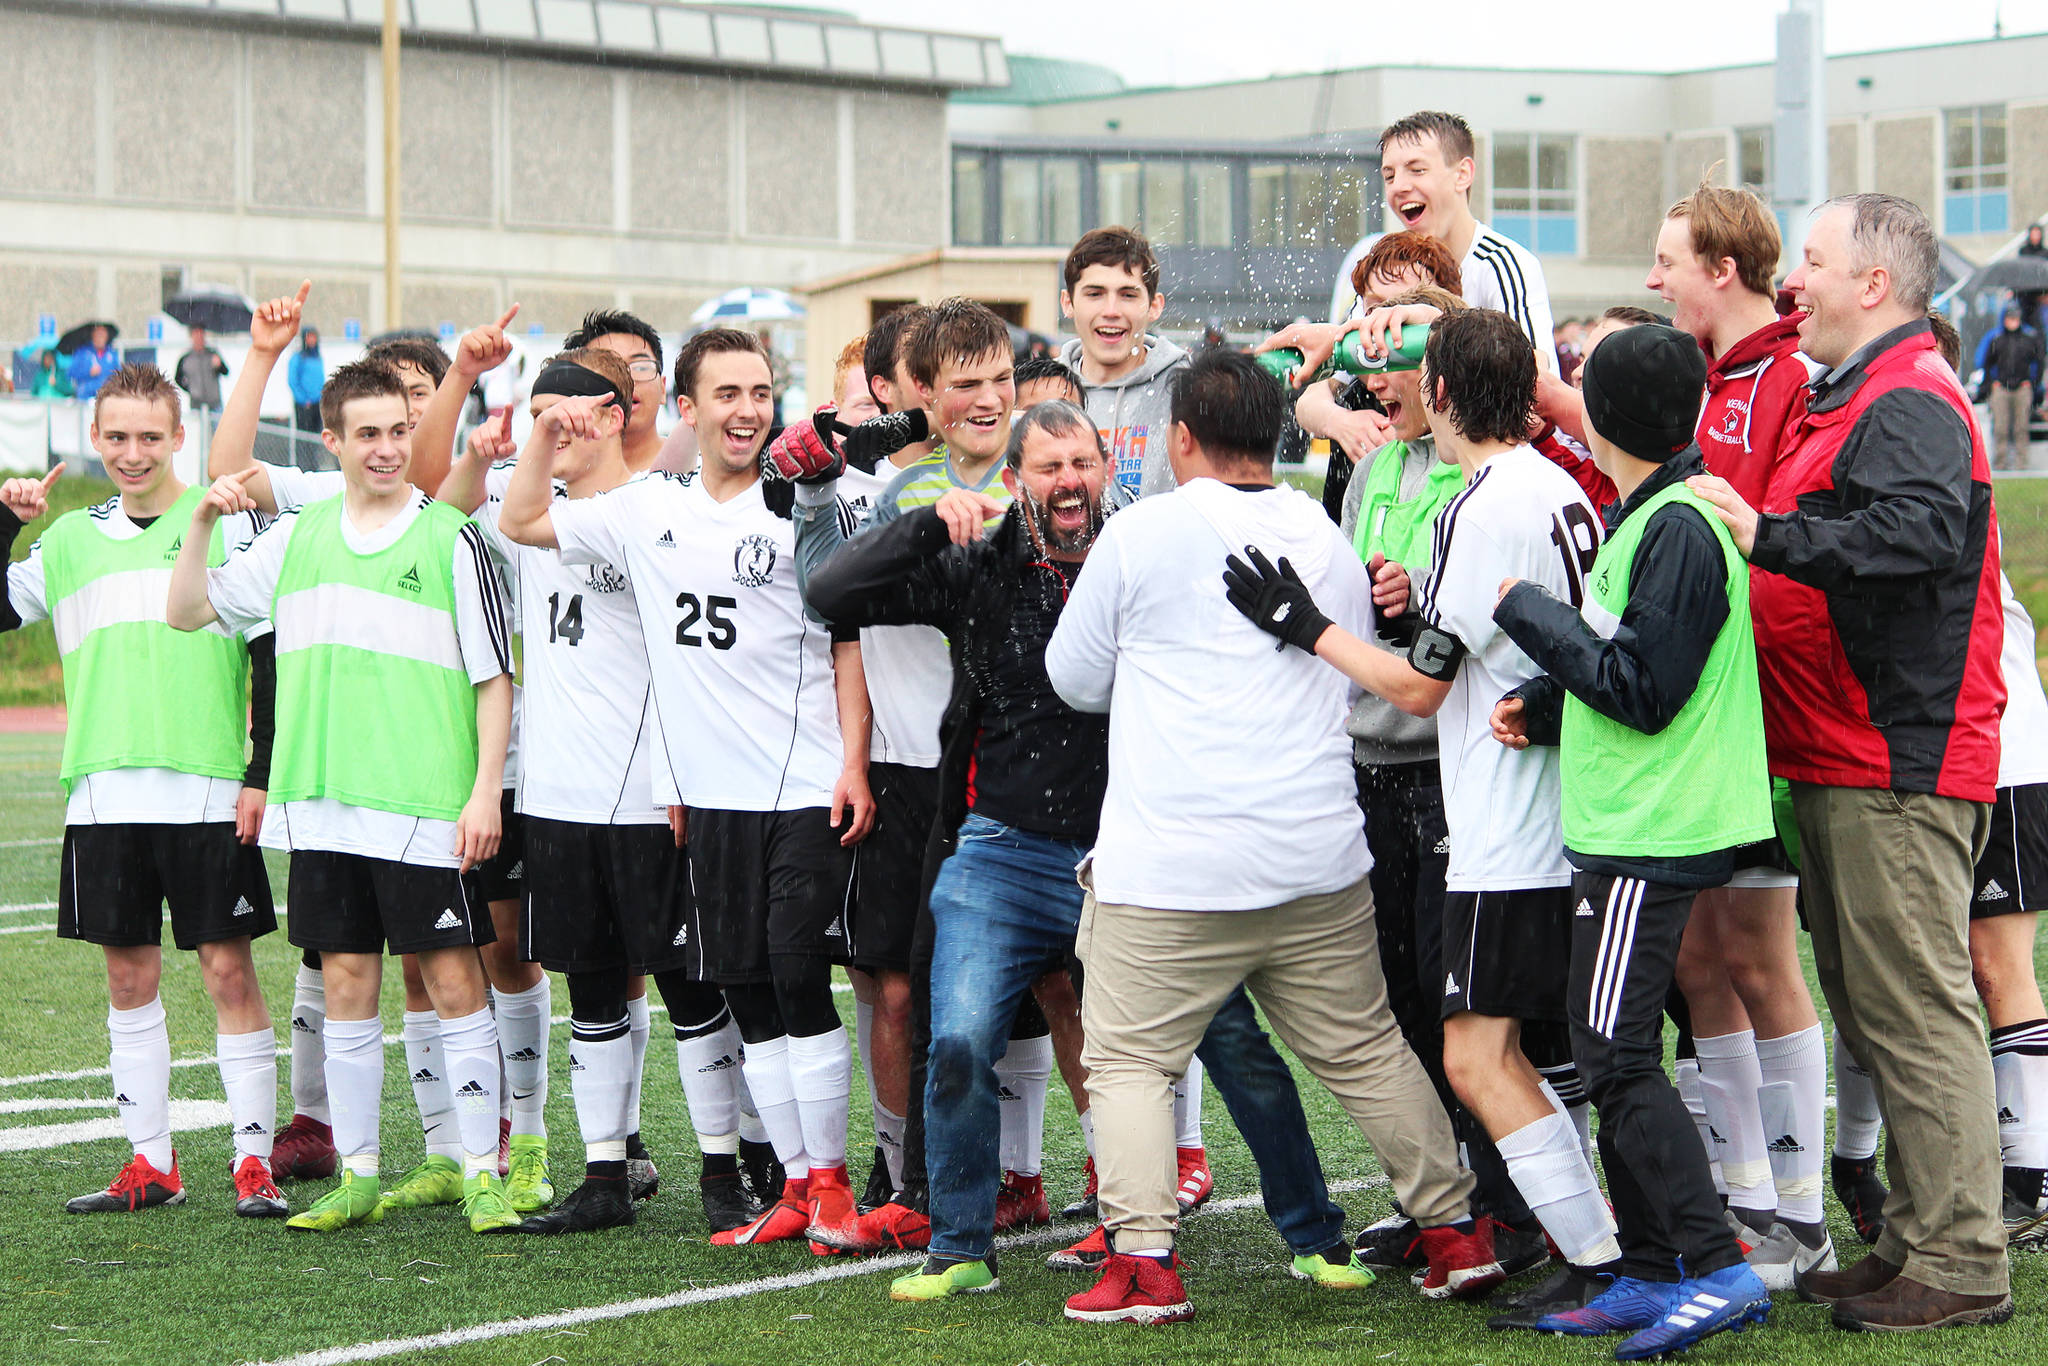 Members of the Kenai boys soccer team dump water on their head coach, Shane Lopez, in celebration of their win over Juneau on Saturday, to claim the Division II state soccer championship title. The game was played at Service High School in Anchorage. (Photo by Megan Pacer/Homer News)